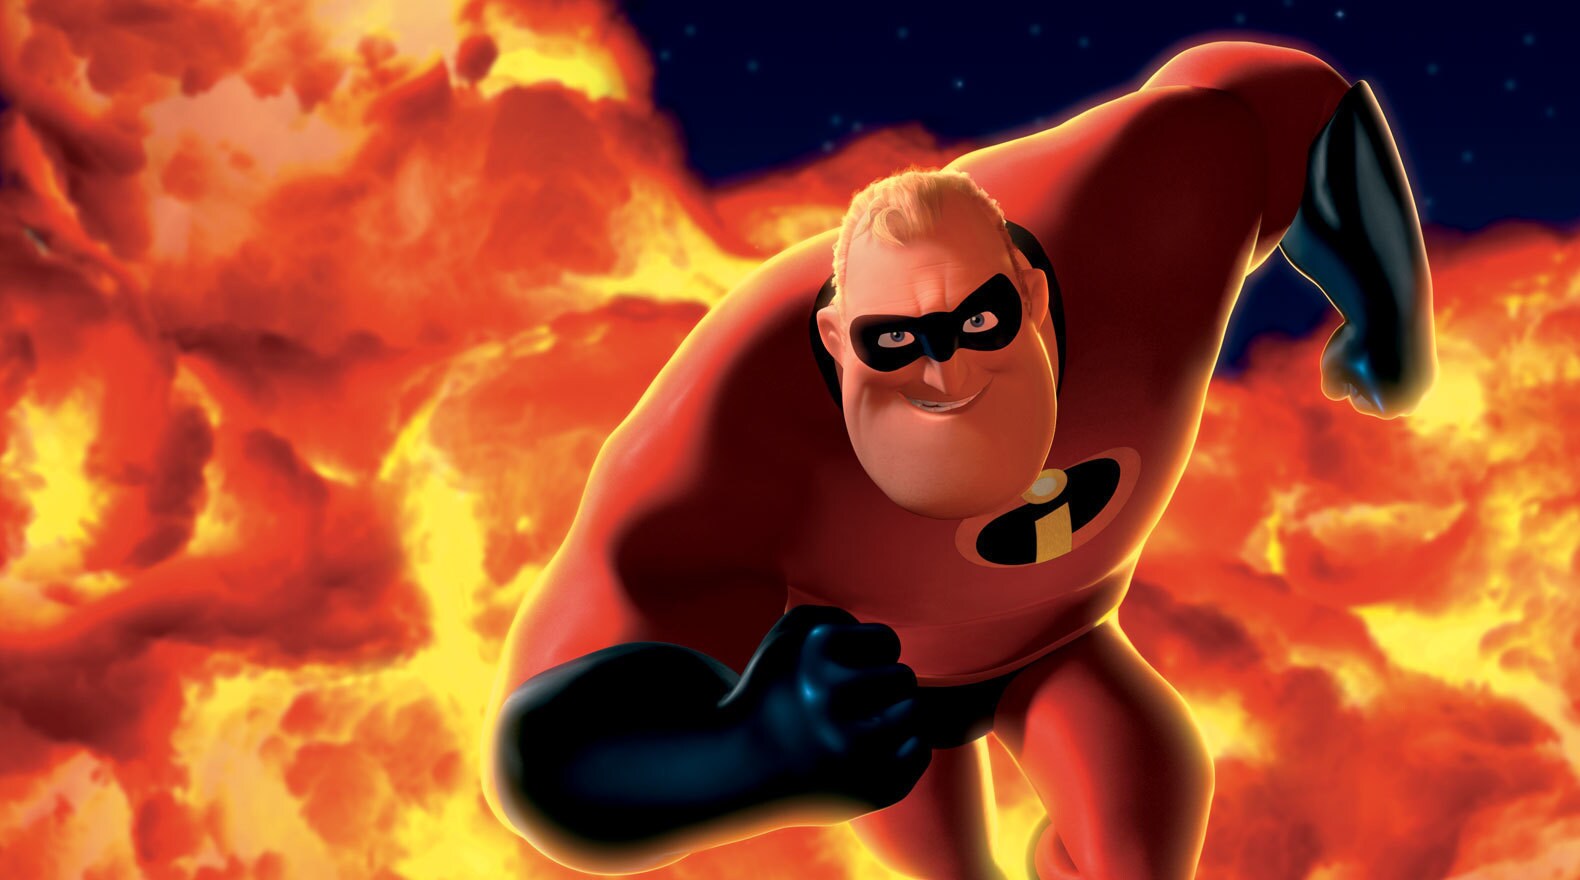 Mr. Incredible from the movie "The Incredibles"